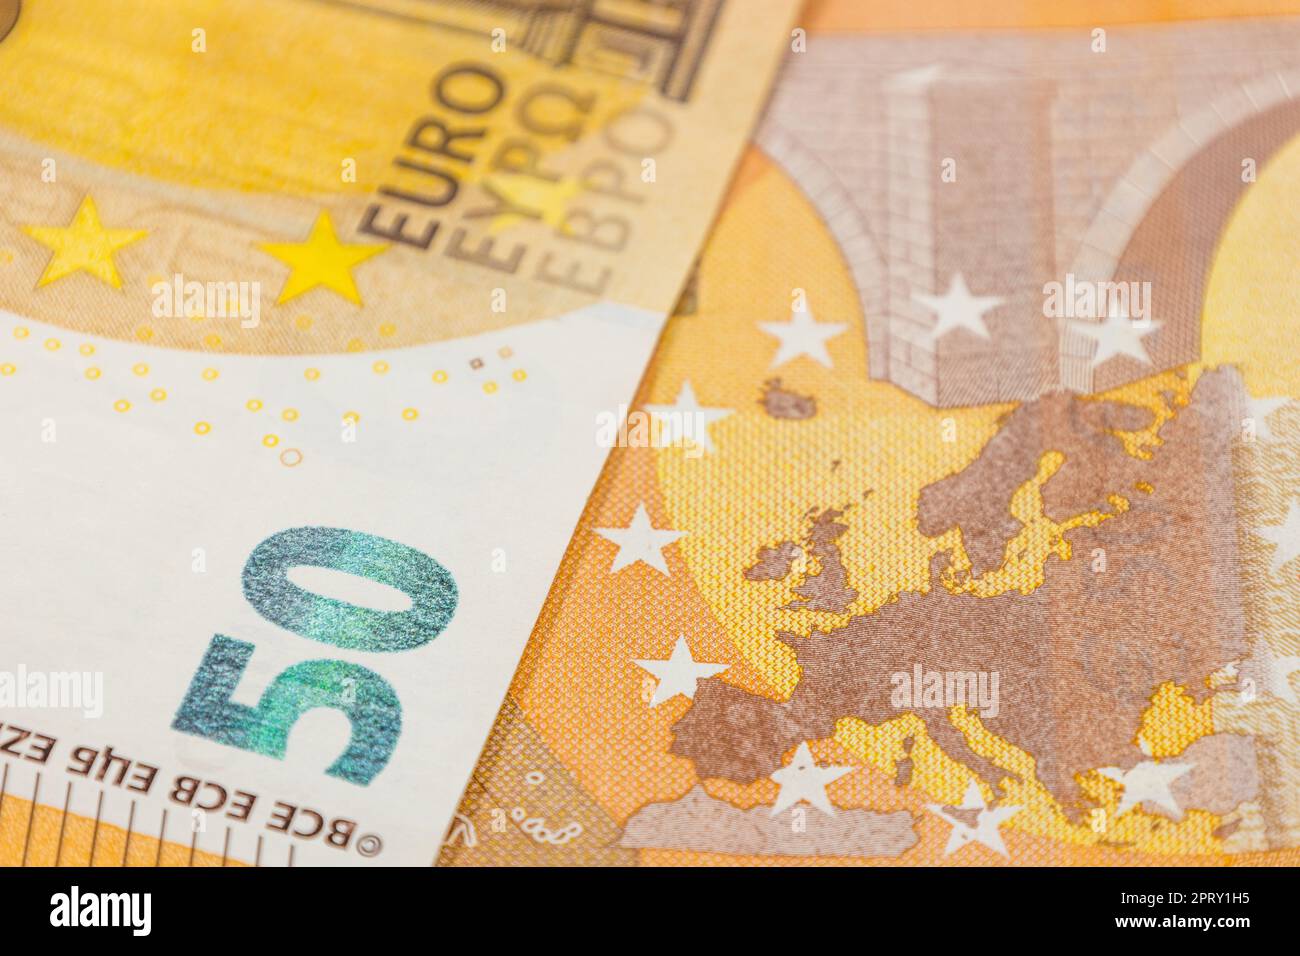 Europe map on a fifty euro banknote. Concept of uniting European countries. Stock Photo